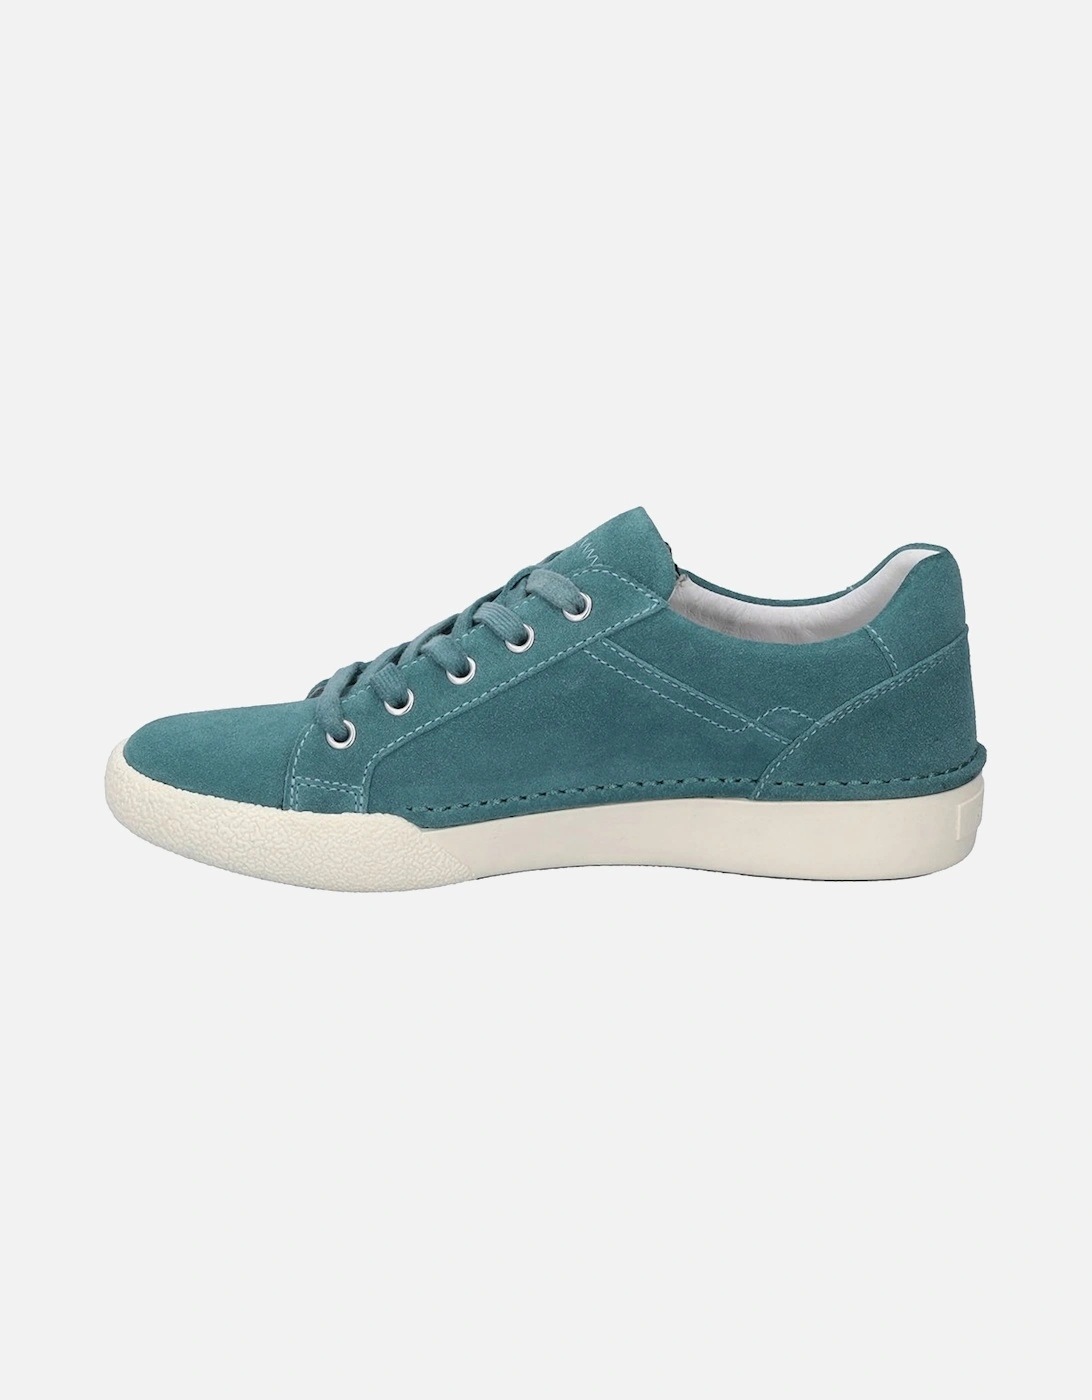 Claire 03 Womens Trainers